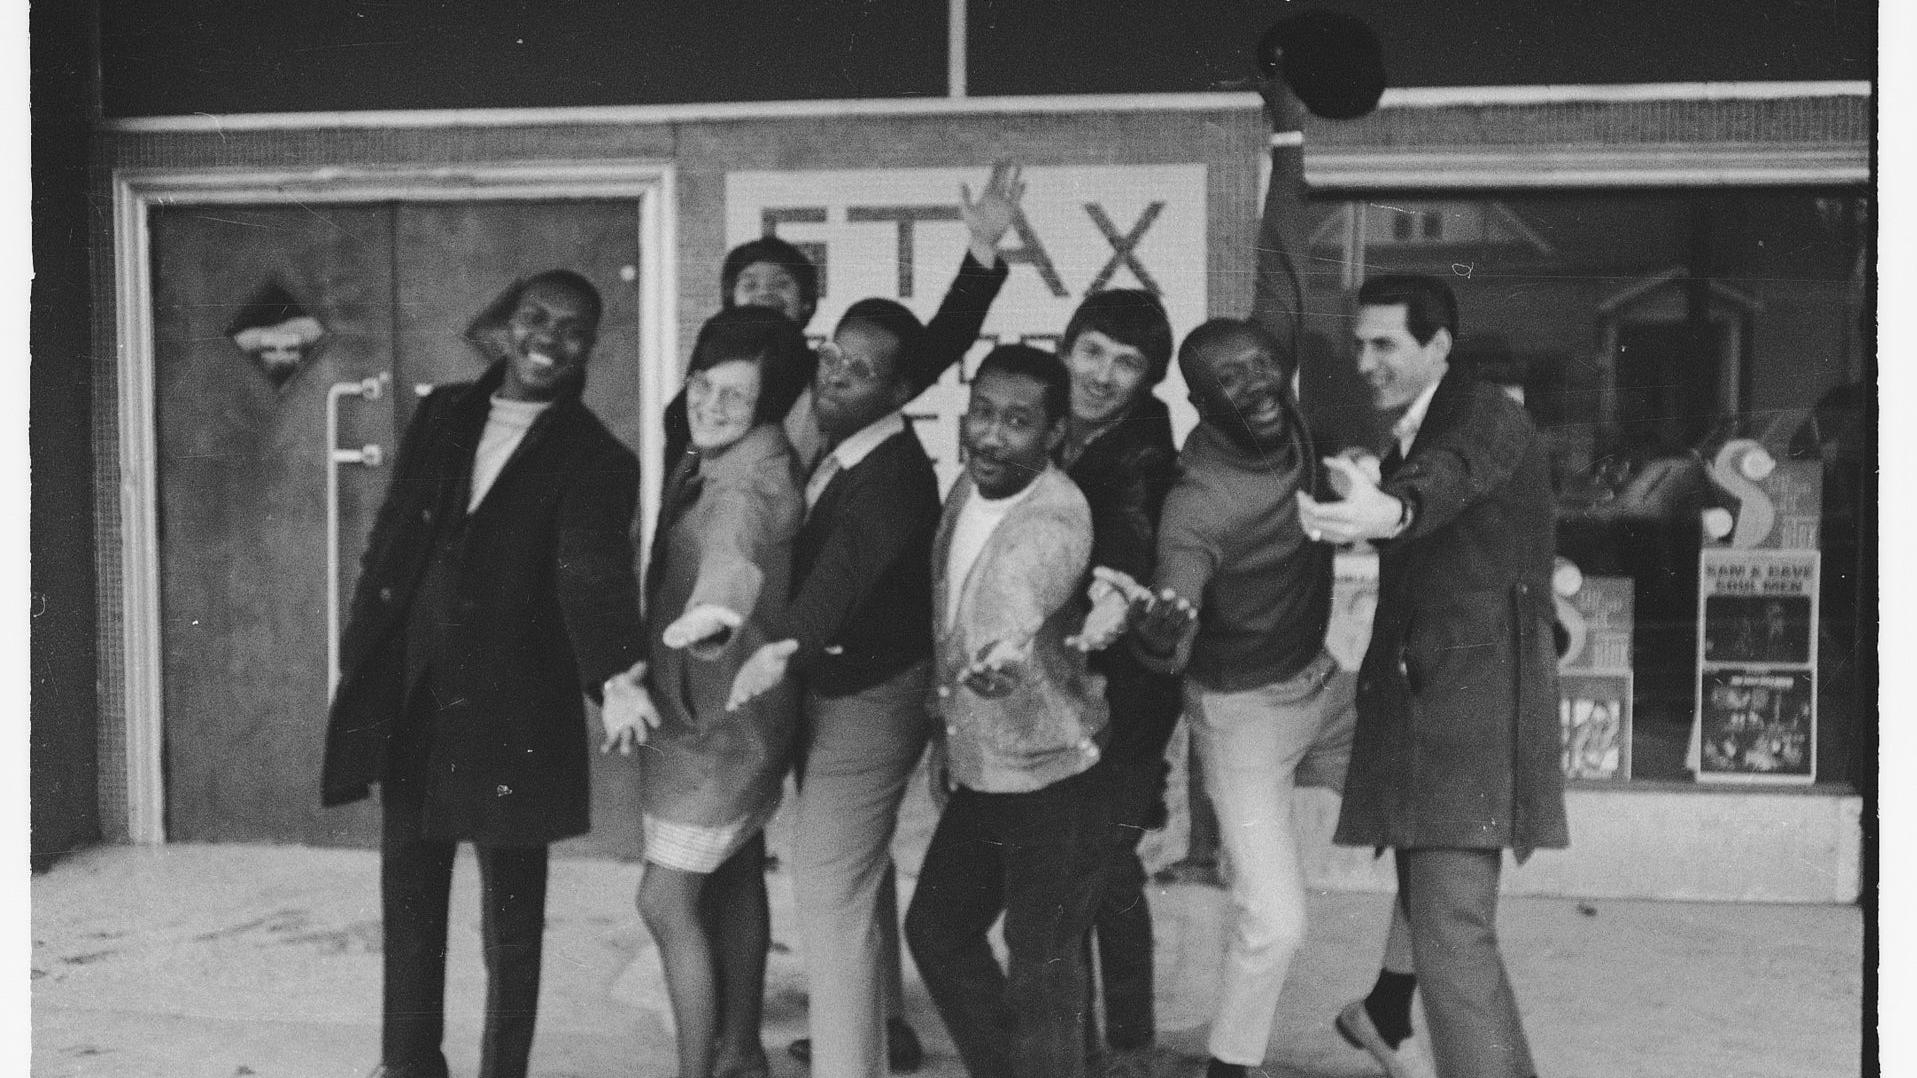 Stax: Soulsville U.S.A. is a goosebumps-inducing underdog story about why art matters